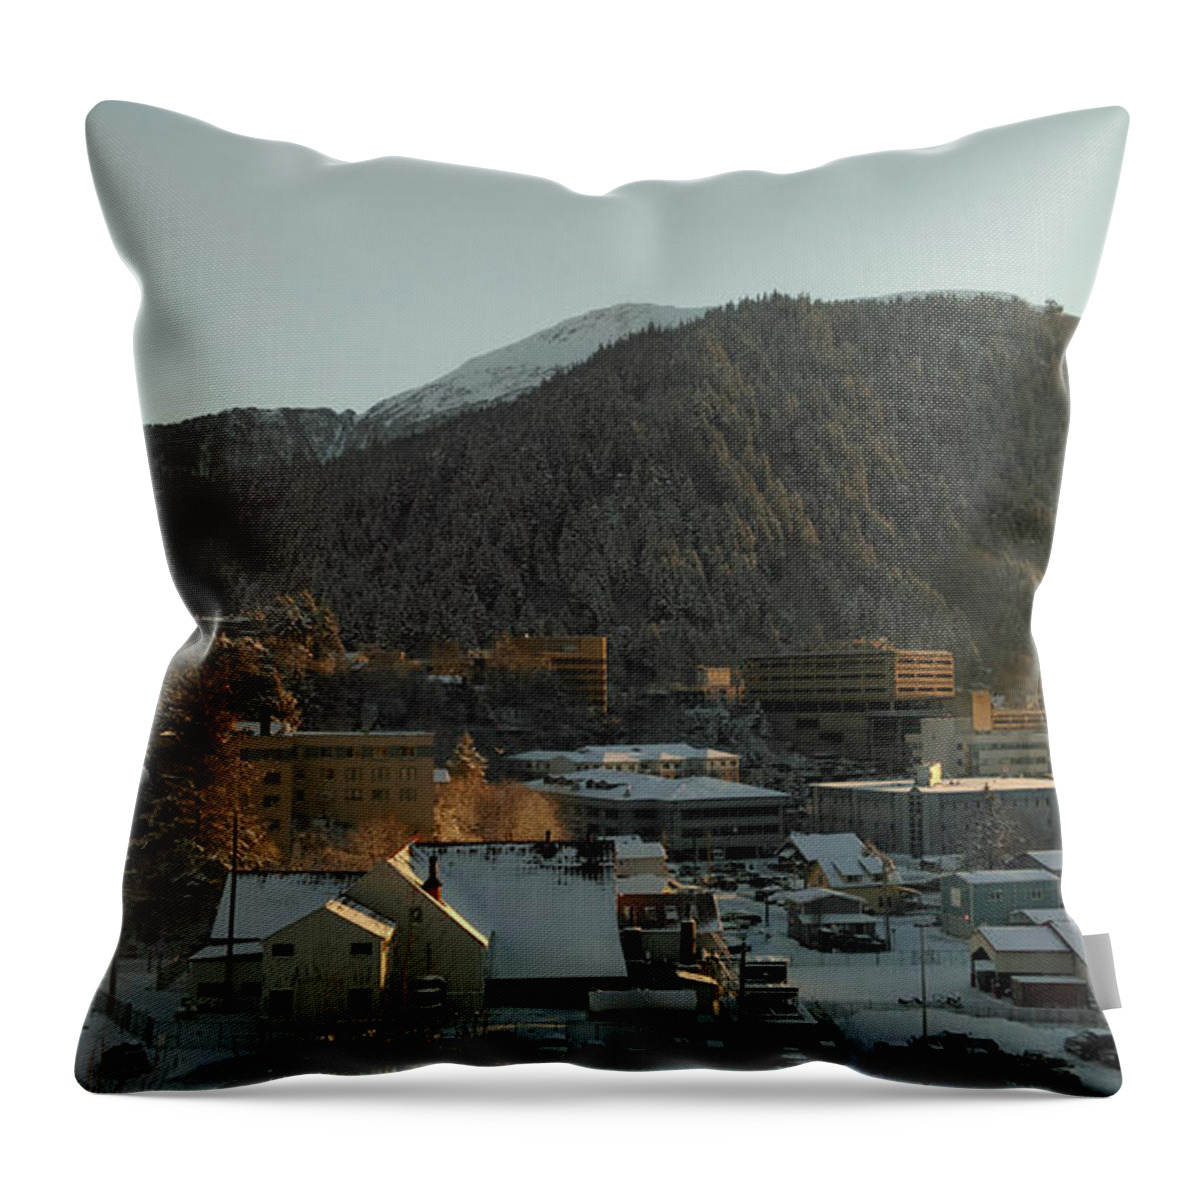 #juneau #alaska #ak #winter #cold #capitalcity #snow #postcard #downtownjuneau #vacation #morning #dawn Throw Pillow featuring the photograph Postcard Capital by Charles Vice